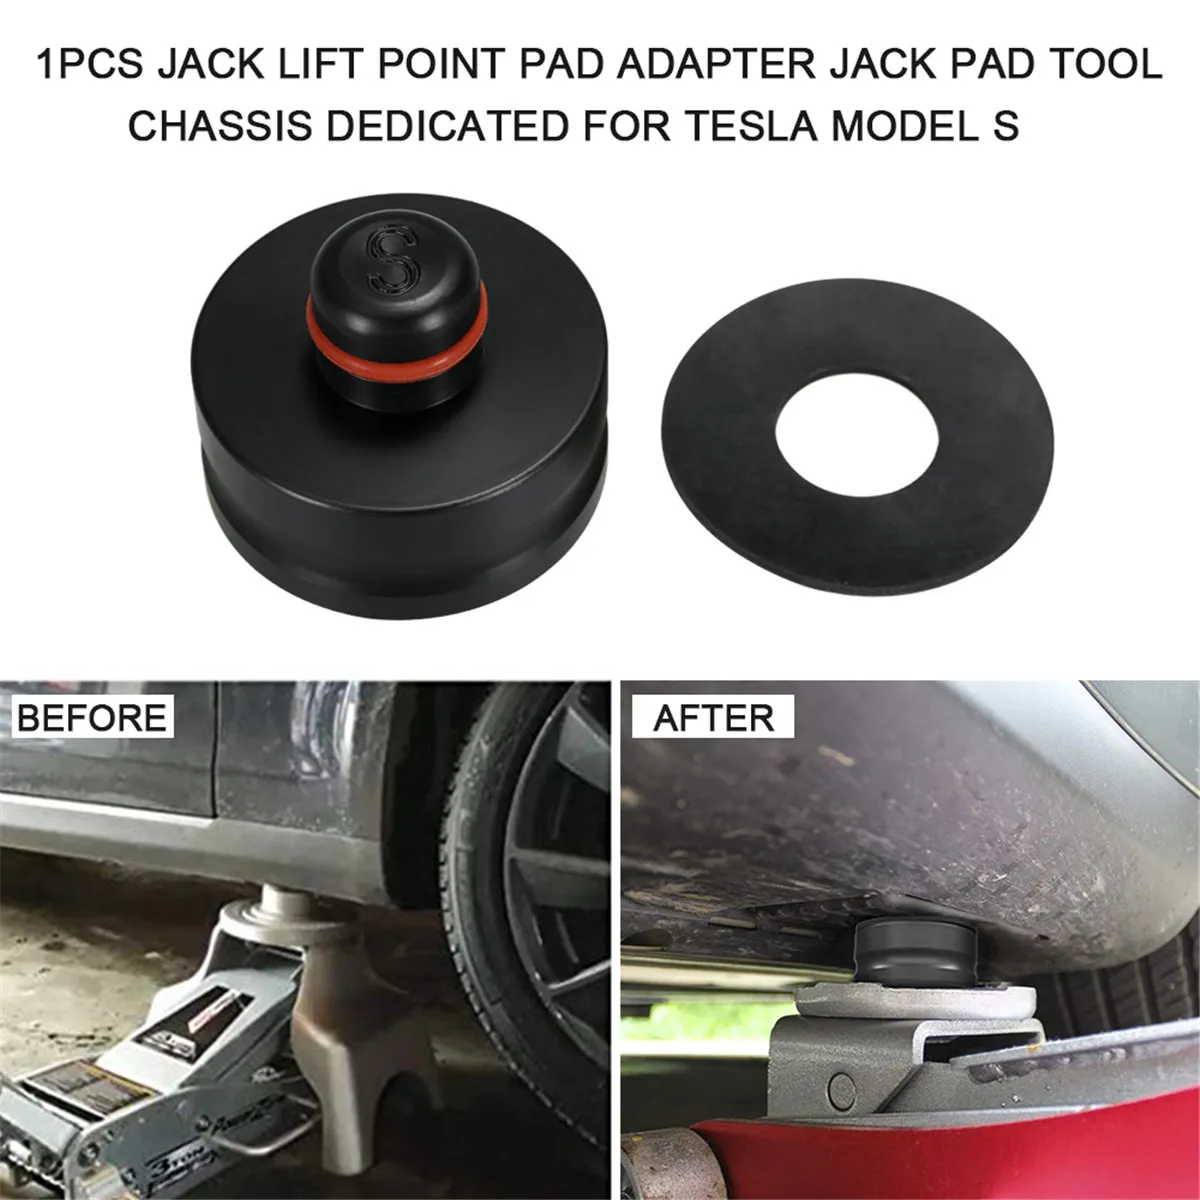 1pc Jack Lift Point Pad Car Styling Tools Jack Lift Raise Chassis Specific Jack Pad Tool Lift Point Adapter For Tesla Model X/S lift